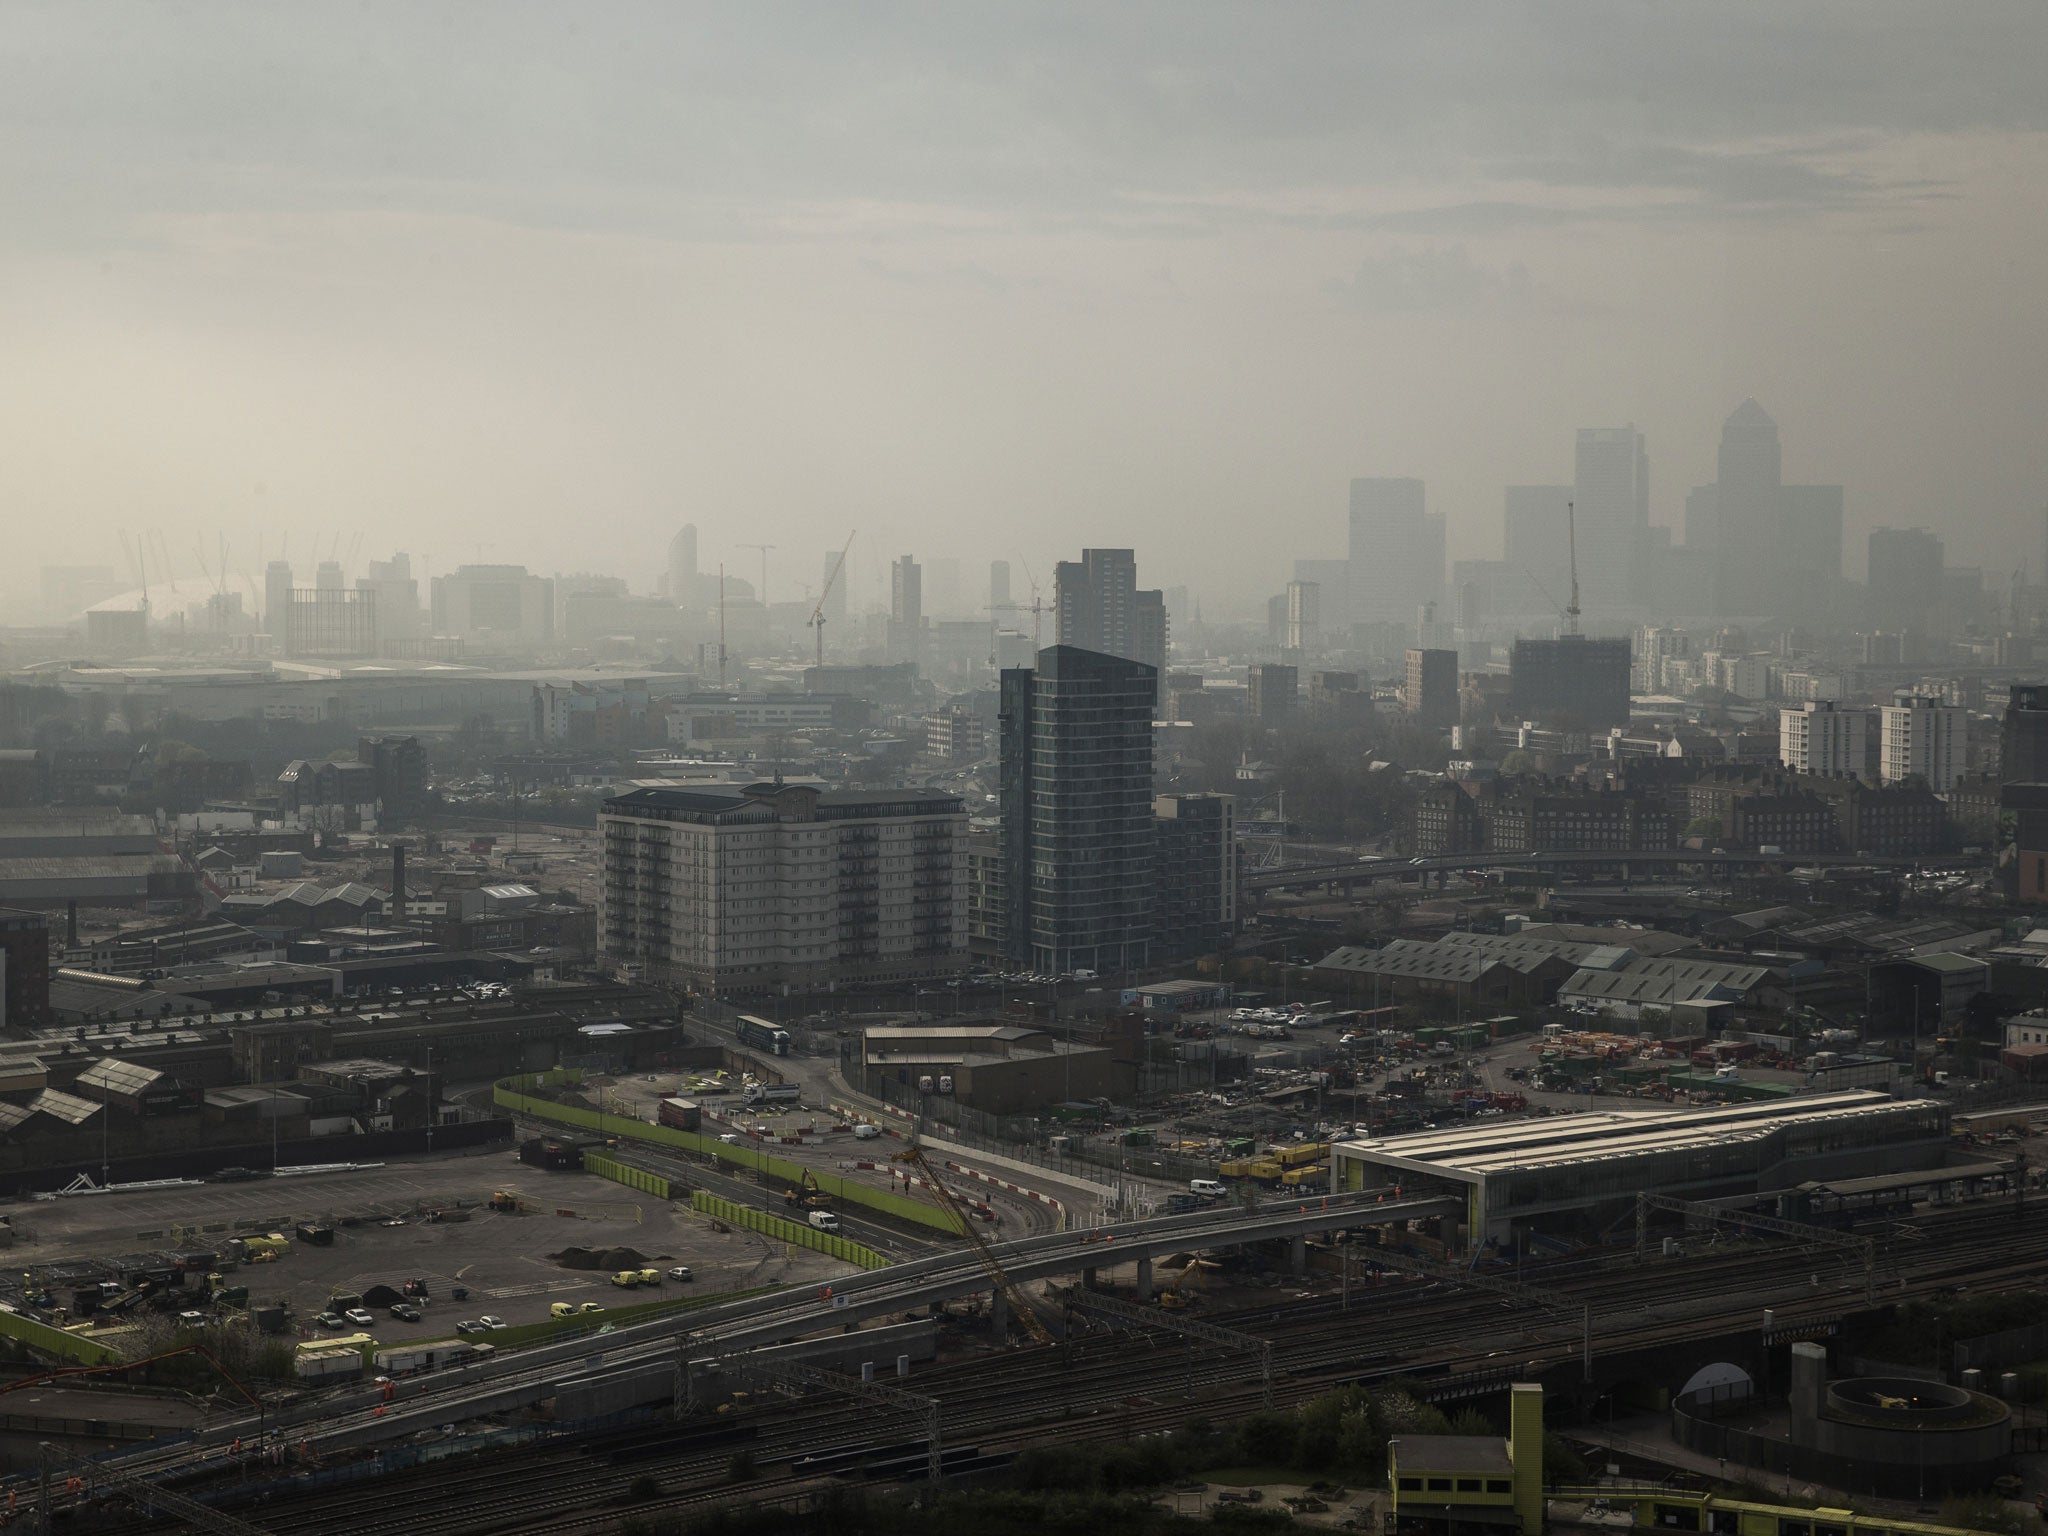 A view through smog over the 02 Arena and the Canary Wharf financial district in London.